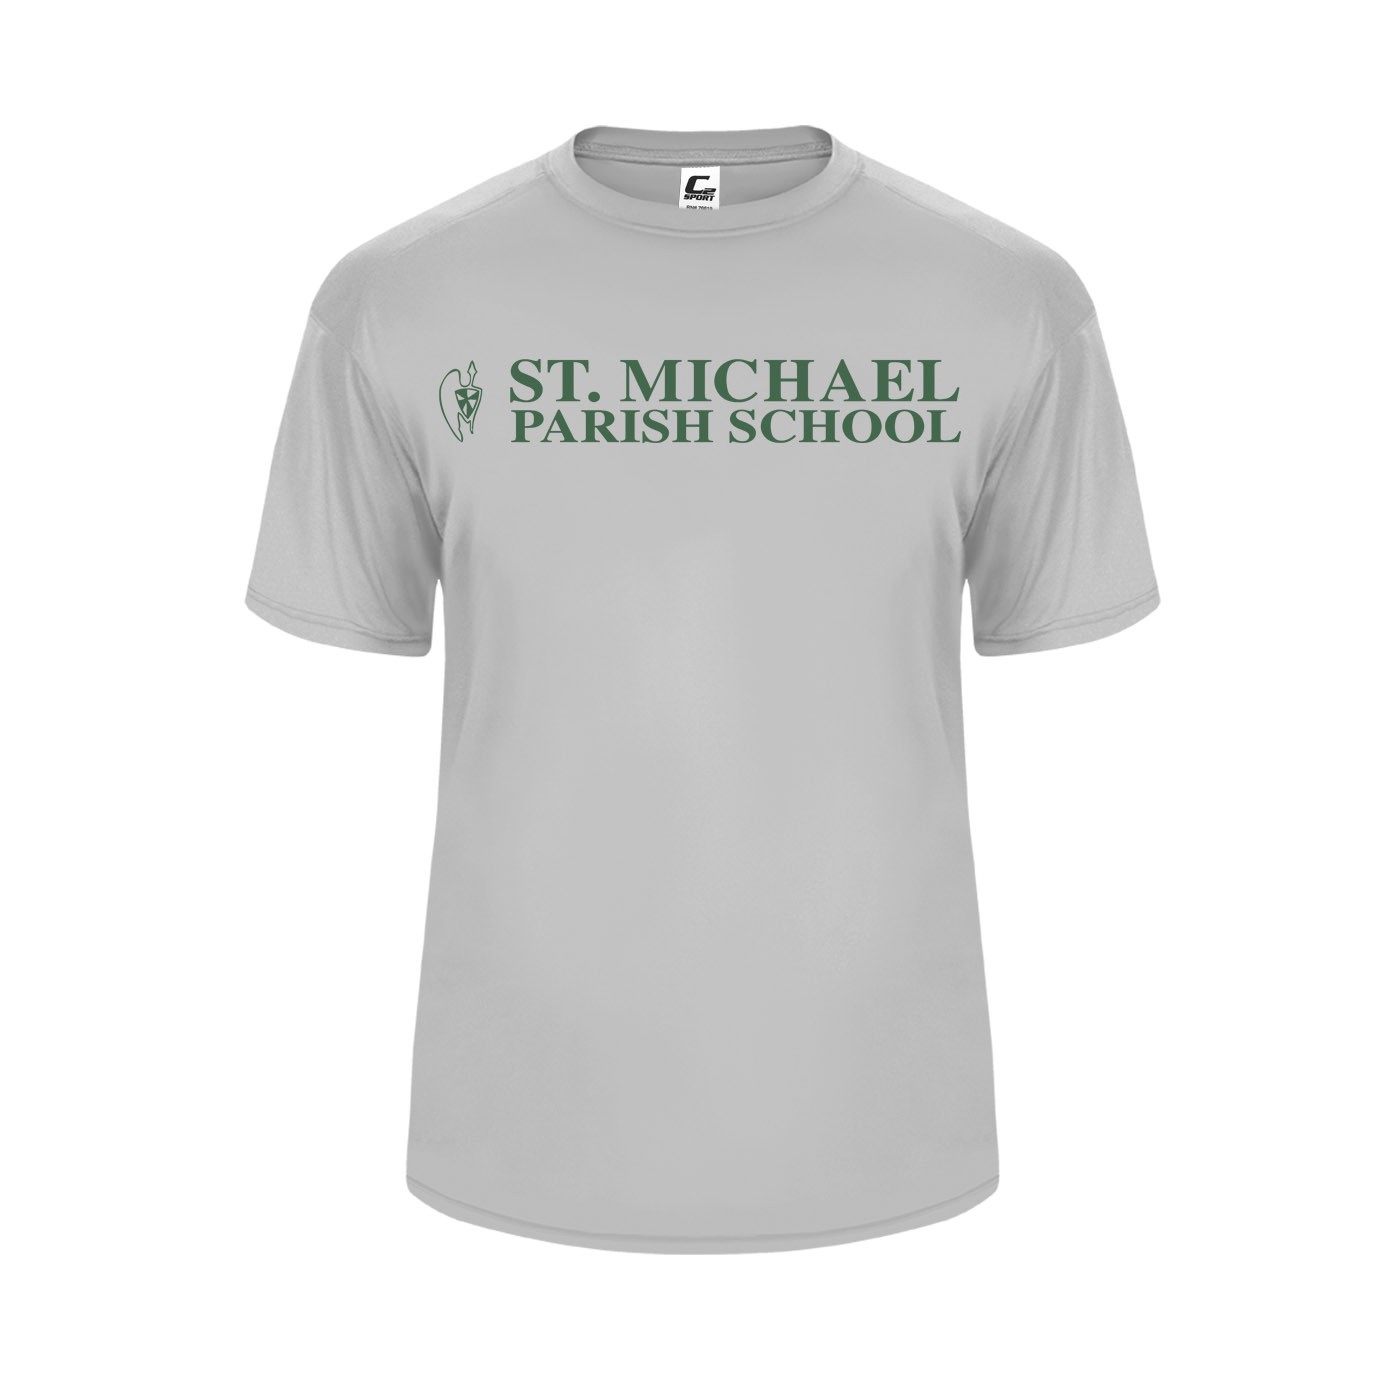 SMSU Spirit S/S Performance T-Shirt w/ Green Logo #4-5- Please Allow 3-4 Weeks for Fulfillment